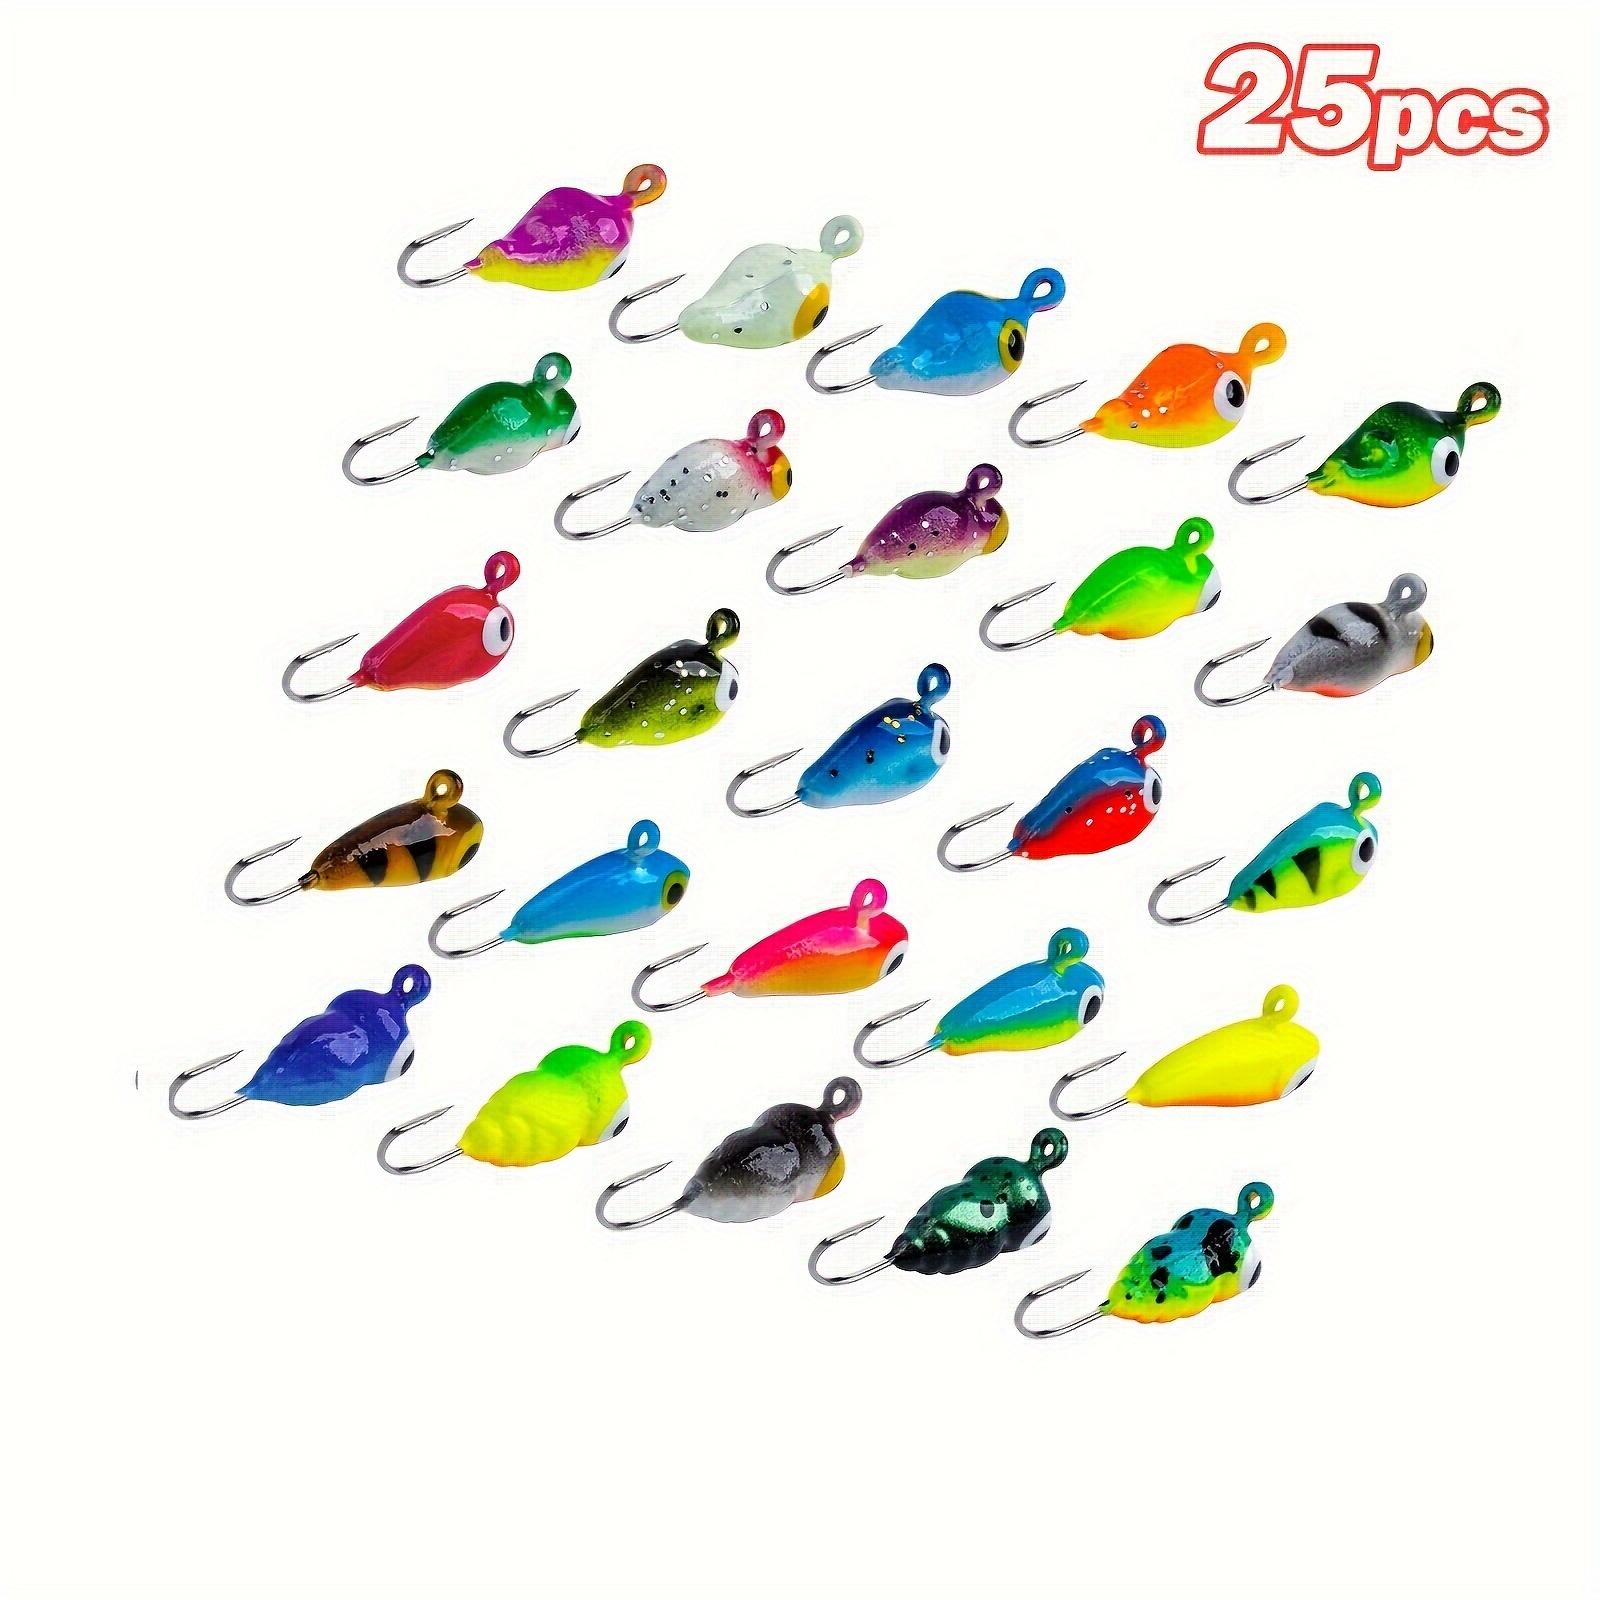 Shappy 88 Pcs Ice Fishing Jigs Kit Includes 48 Jig Heads Hook Set and 40  Soft Baits Fishing Hooks Lures Winter Fishing Tackle Set for Bass Trout